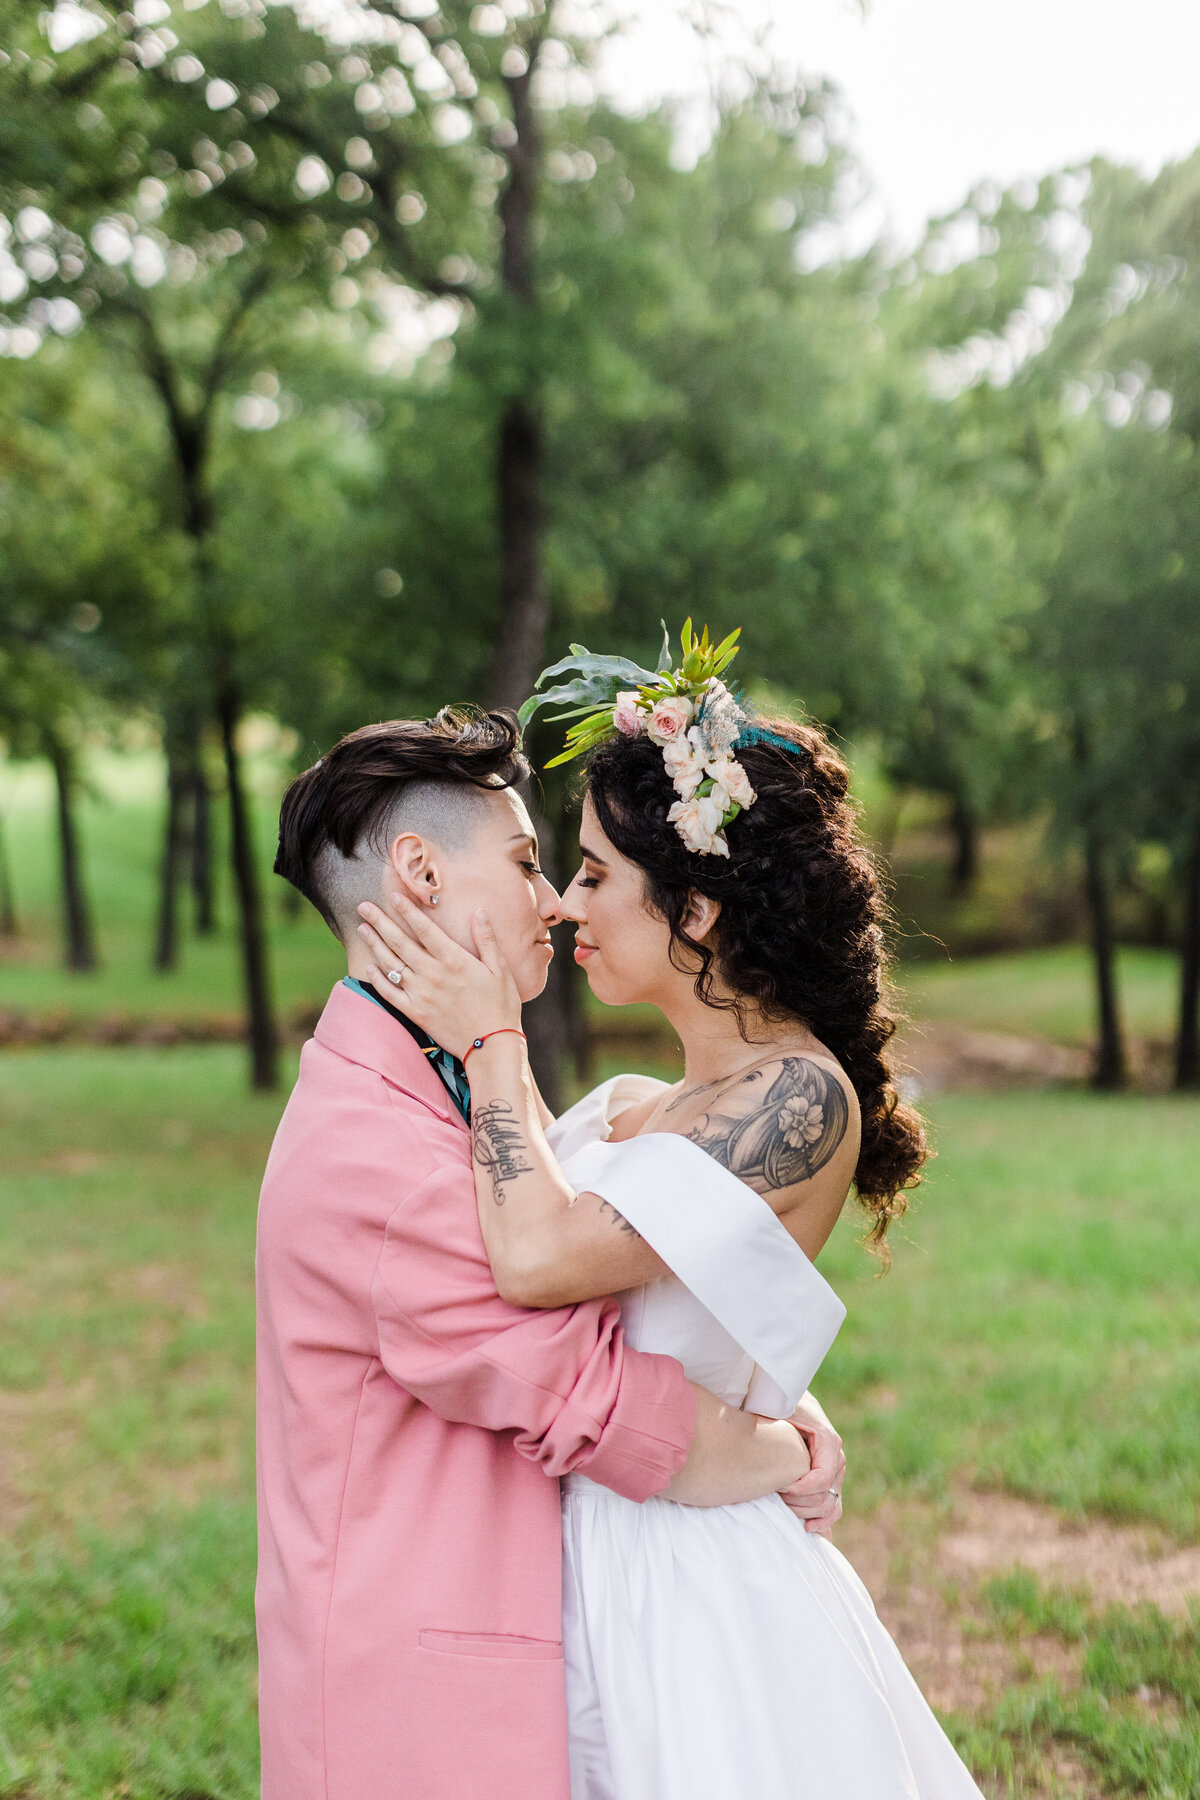 An outdoor photo of two brides holding each other close and bringing each other in for a kiss. The bride on the left is wearing a salmon suit with a colorful tie while the bride on the right is wearing an elegant white dress with a flower crown.